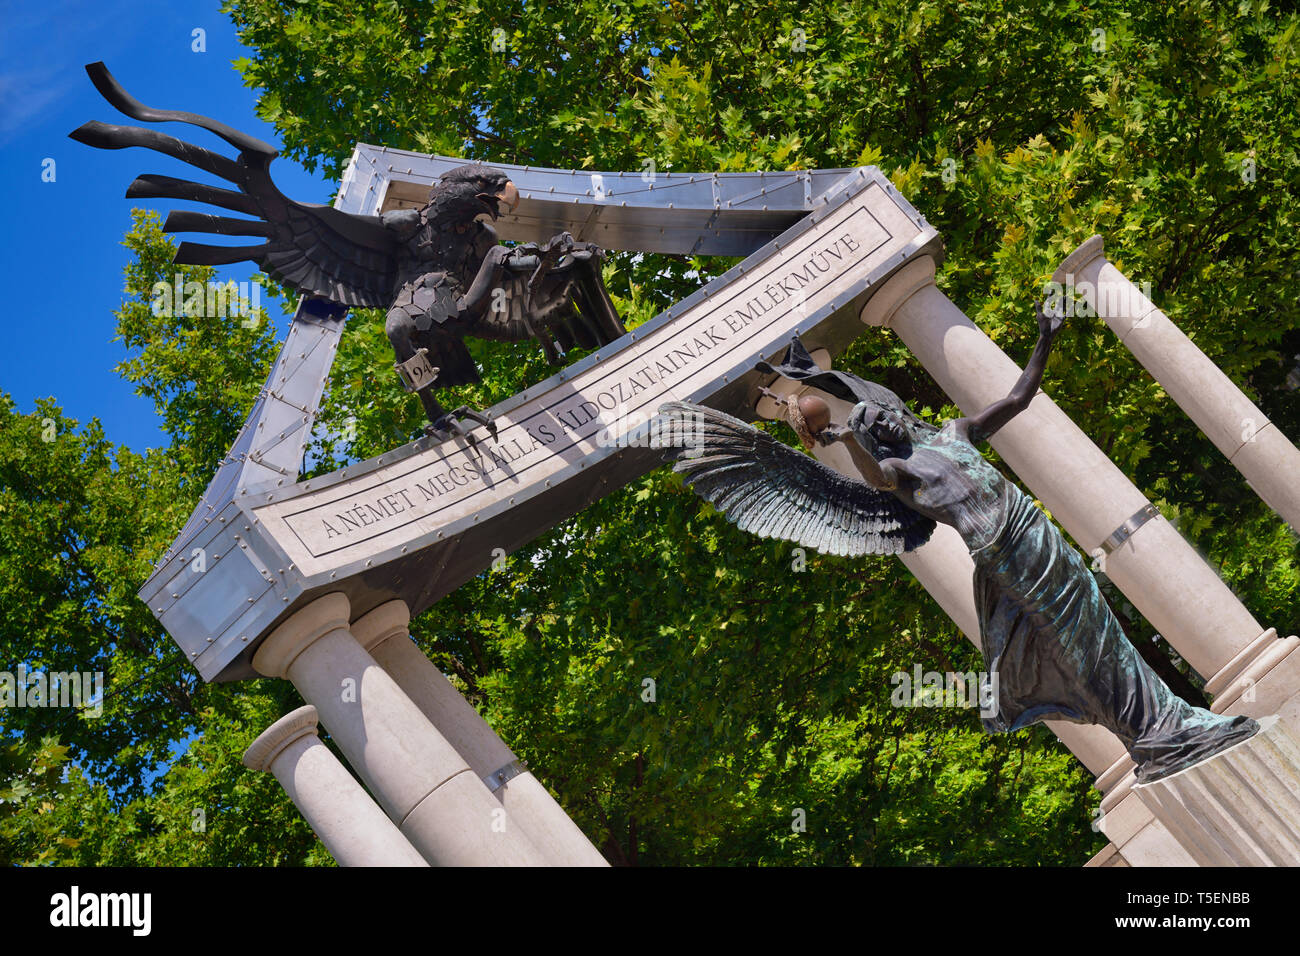 Hungary, Budapest, Szabadsag or Liberty Square,  detail of the Antifascist Monument dedicated  to victims of German occupation. Stock Photo